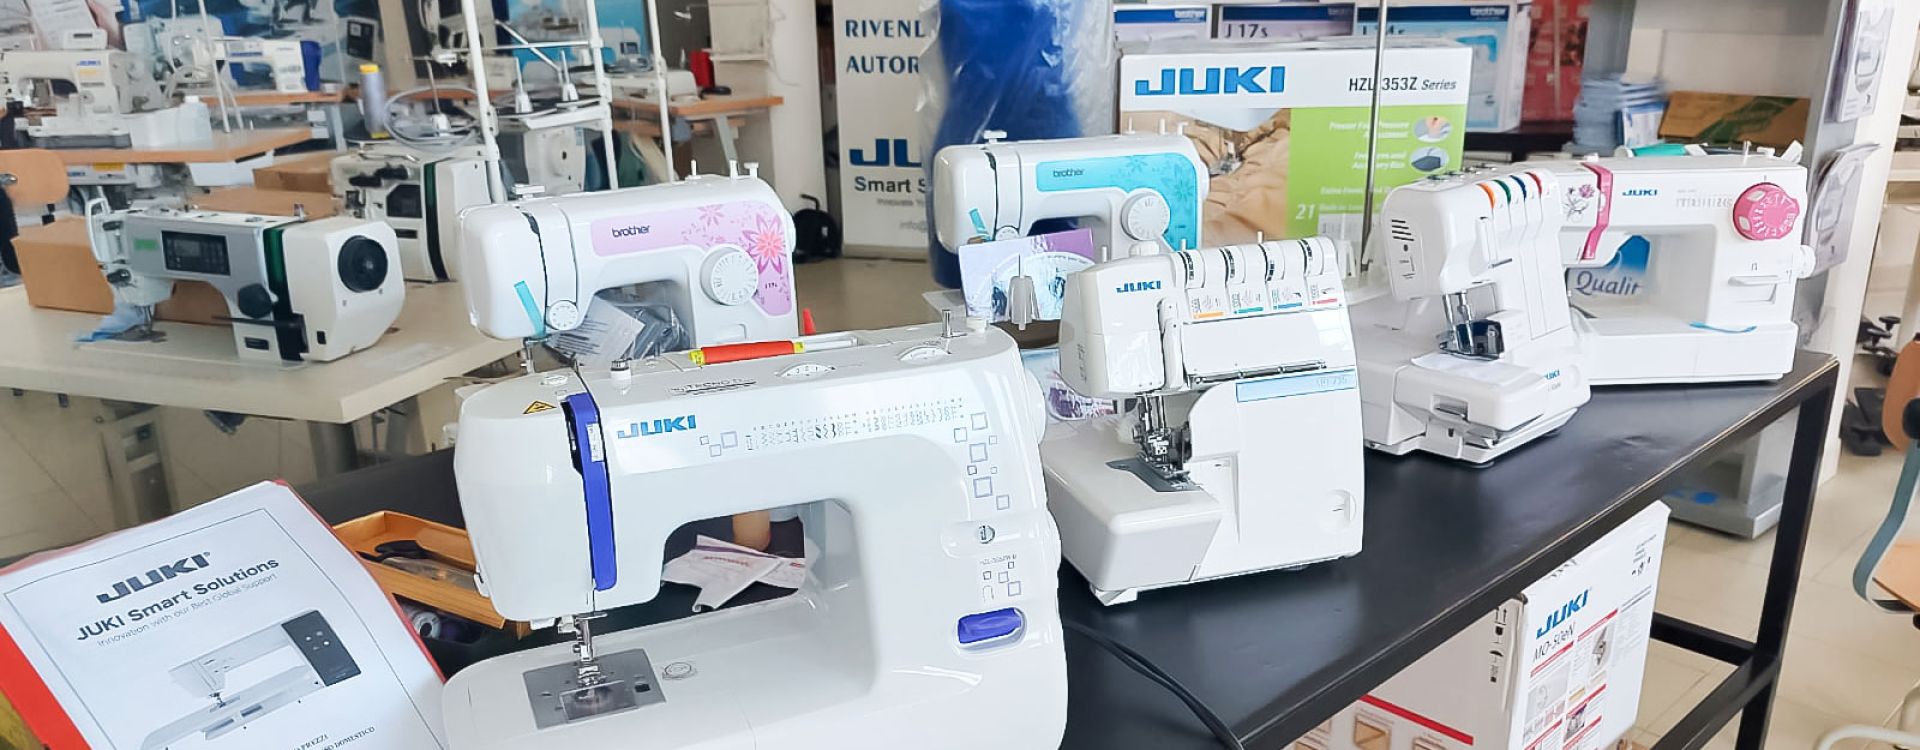 TECNOD snc - industrial and family sewing machines Abruzzo